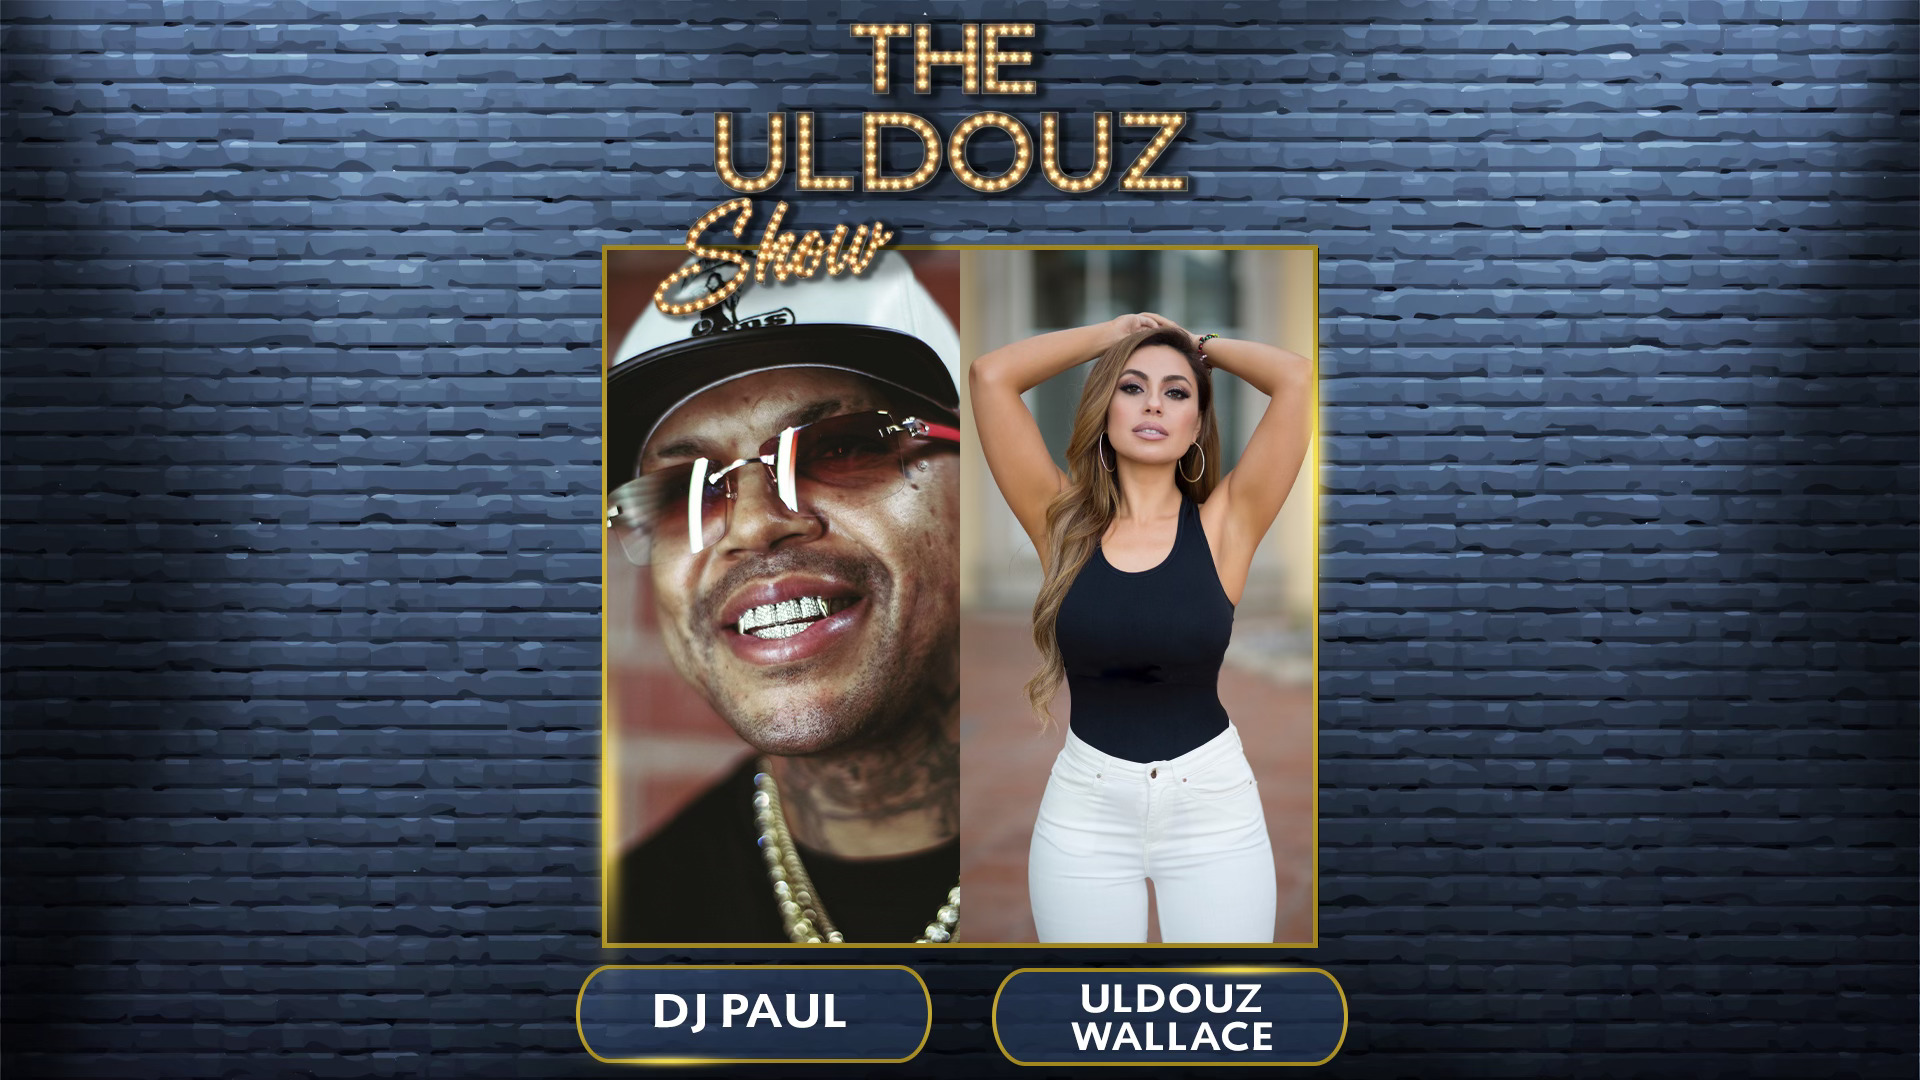 The Uldouz Show with Guest DJ Paul. From Three 6 Mafia.